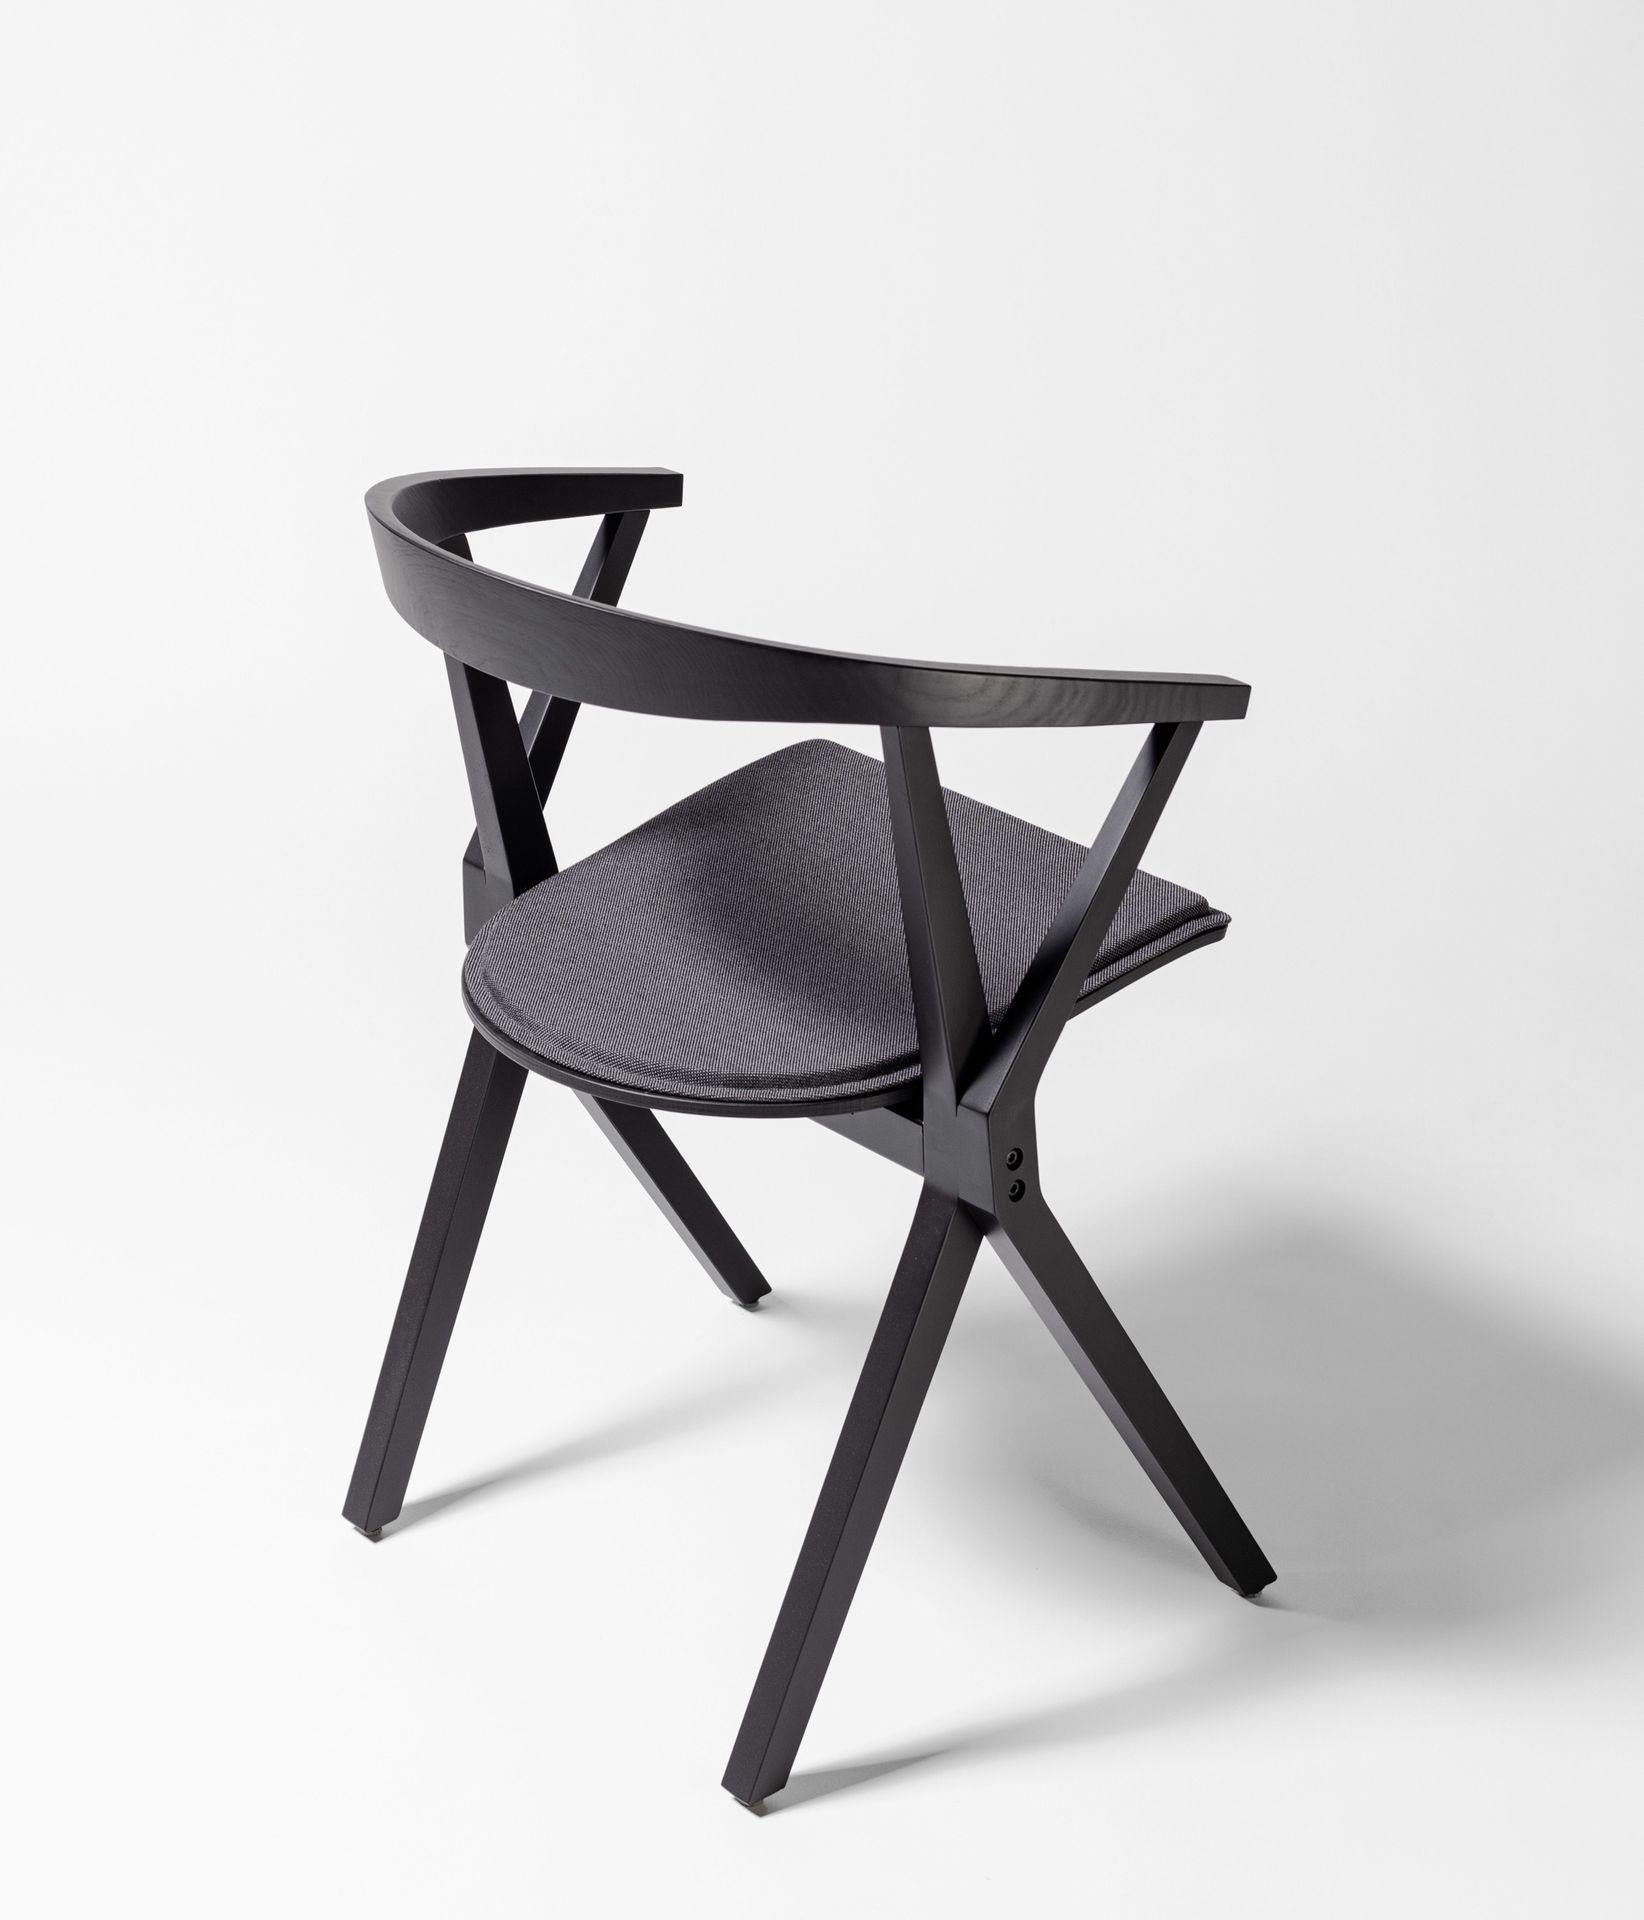 Spanish Chair B Black Lacquered Ash by Konstantin Grcic